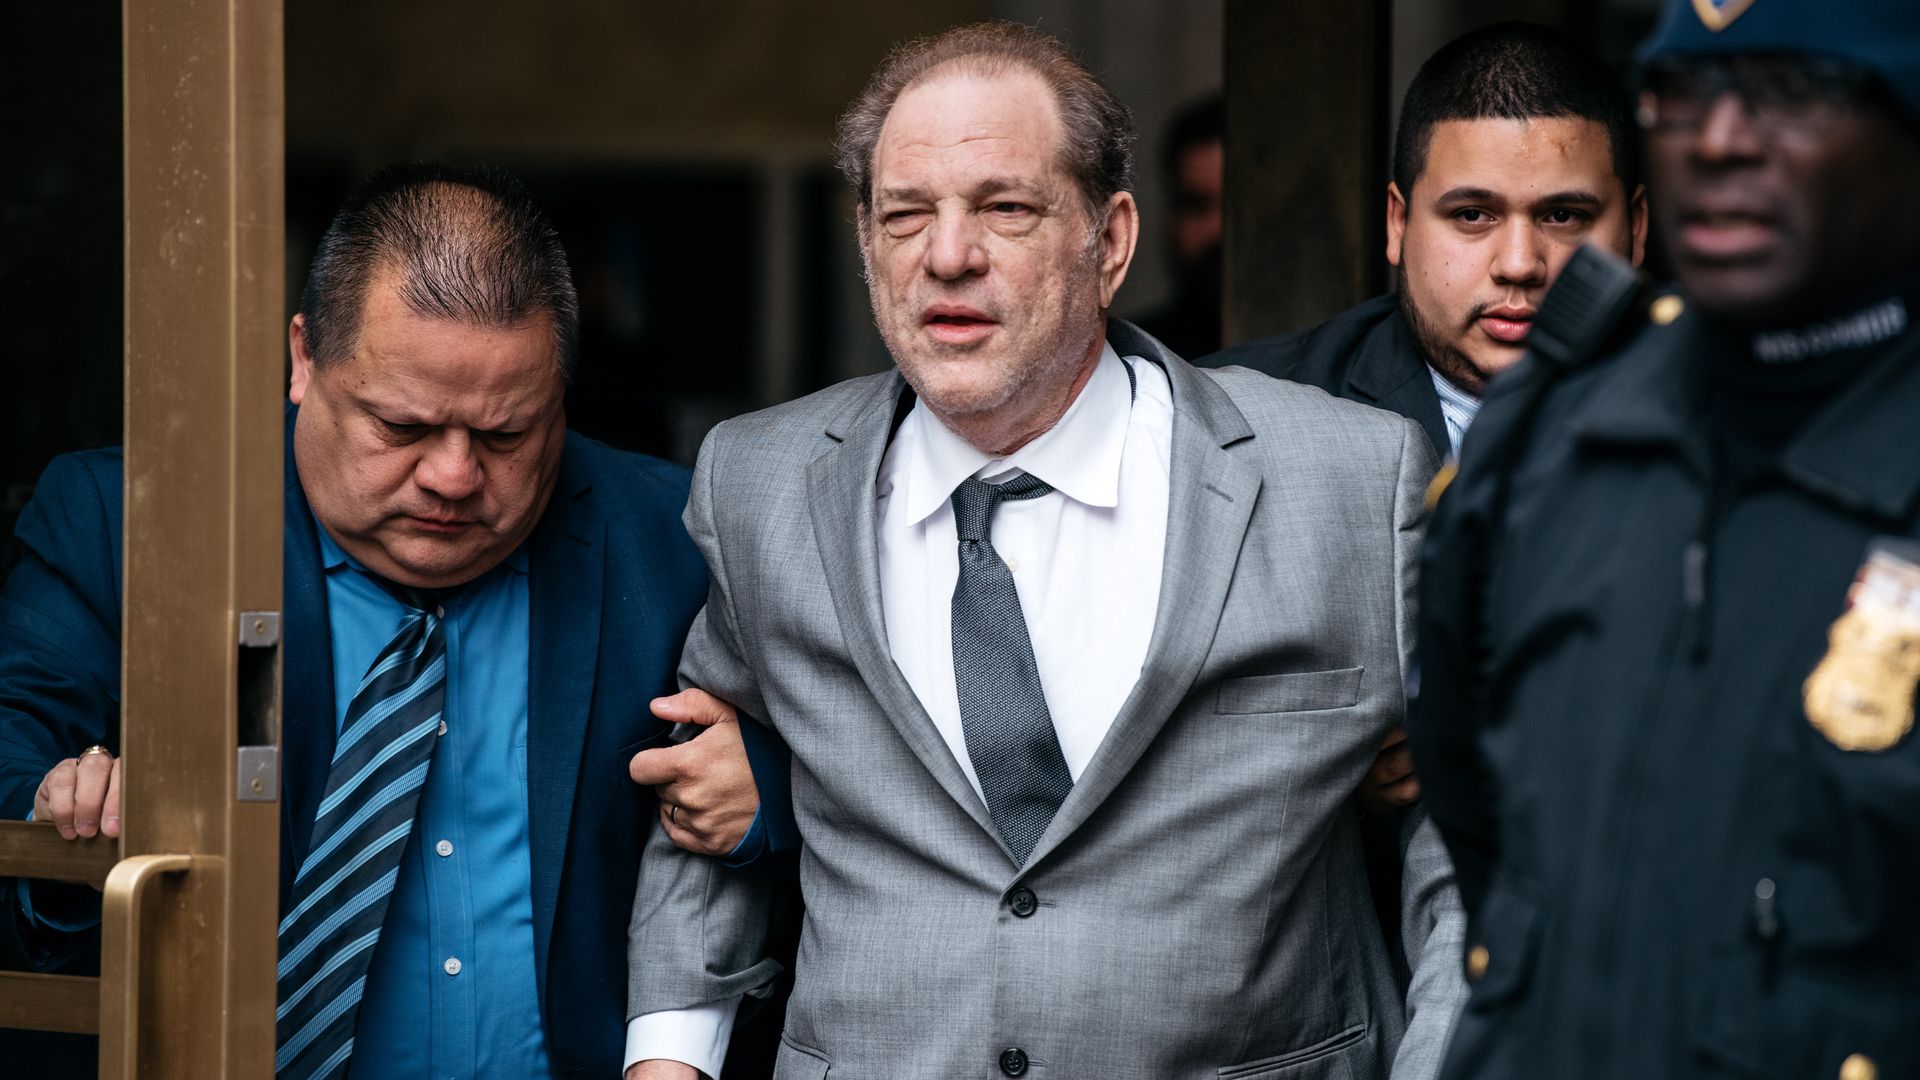 Harvey Weinstein leaves New York City Criminal Court after a bail hearing on December 6, 2019 in New York City.